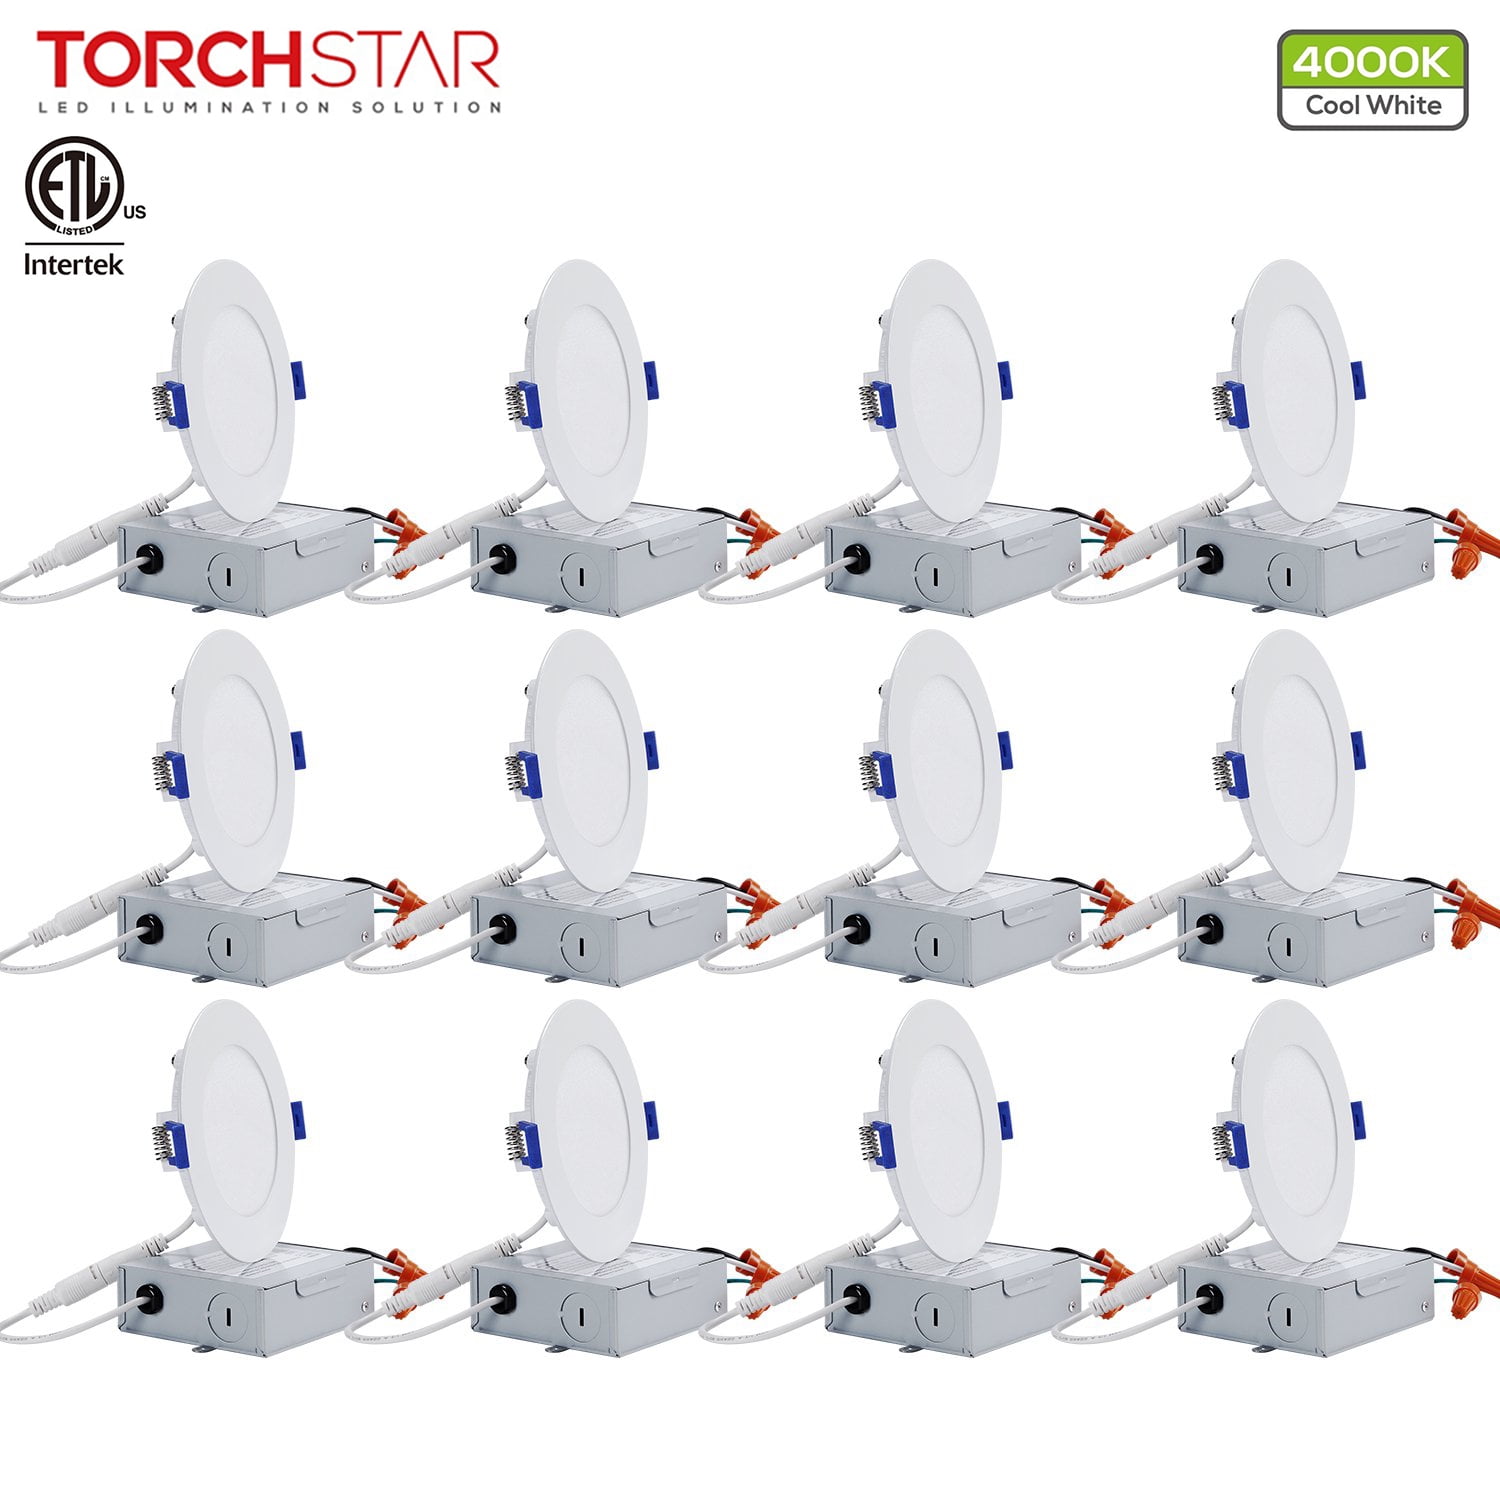 Dimmable 10W 80W Eqv CRI 90+ ETL & Energy Star Listed TORCHSTAR 12-Pack 4 Inch Slim Recessed Lighting with Junction Box Eye-Caring Can-Killer Airtight IC Rated Downlight 4000K Cool White